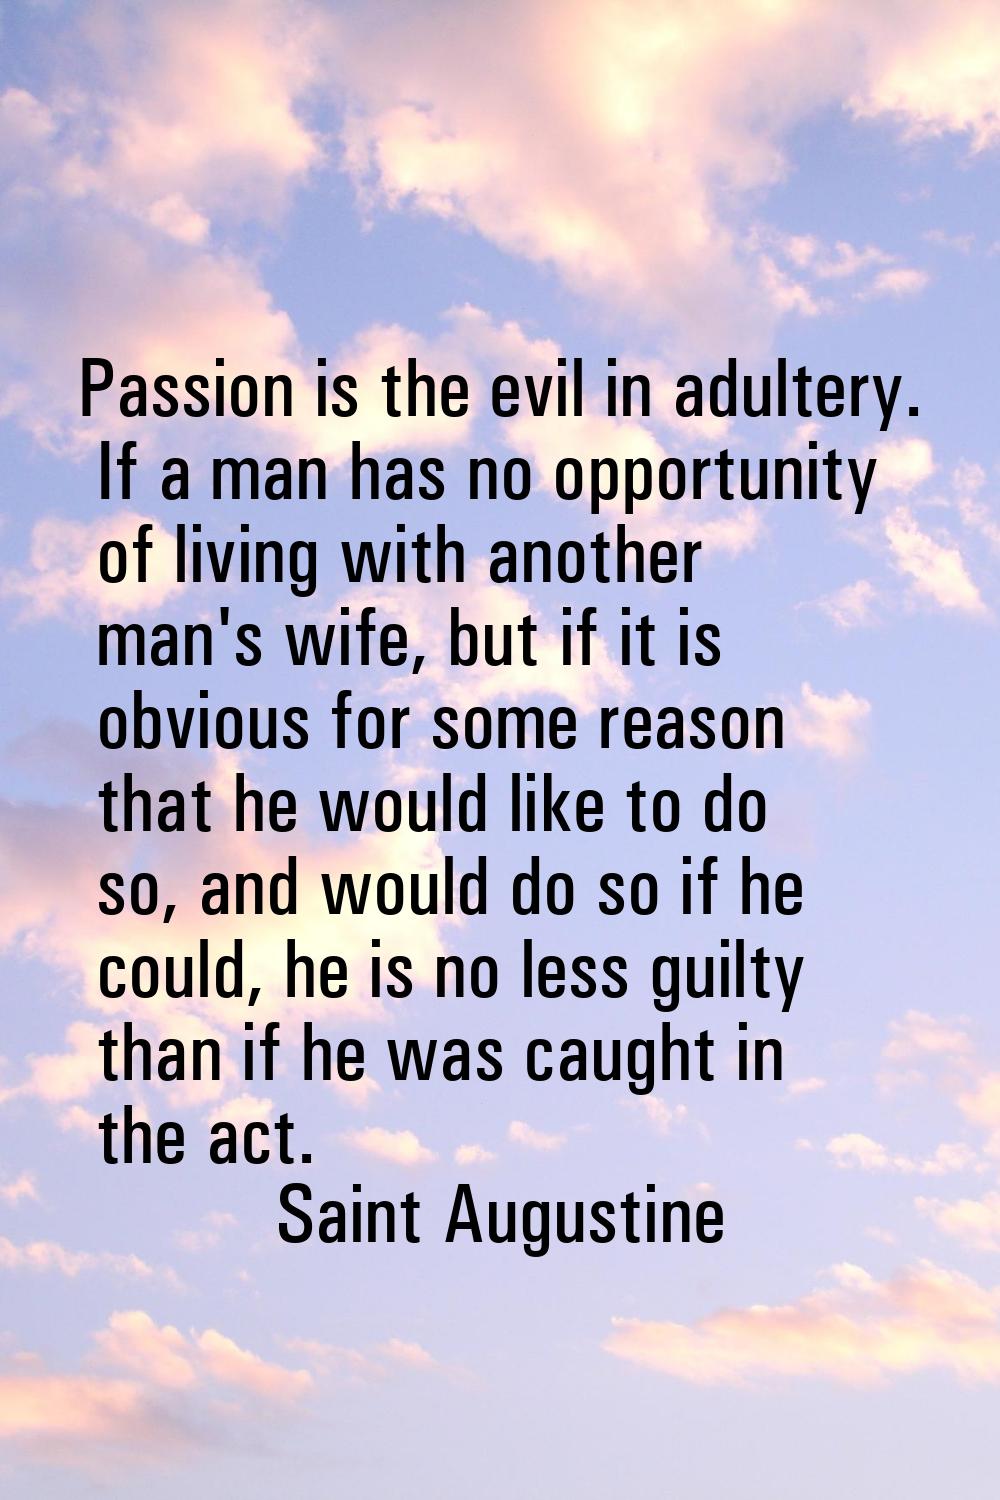 Passion is the evil in adultery. If a man has no opportunity of living with another man's wife, but